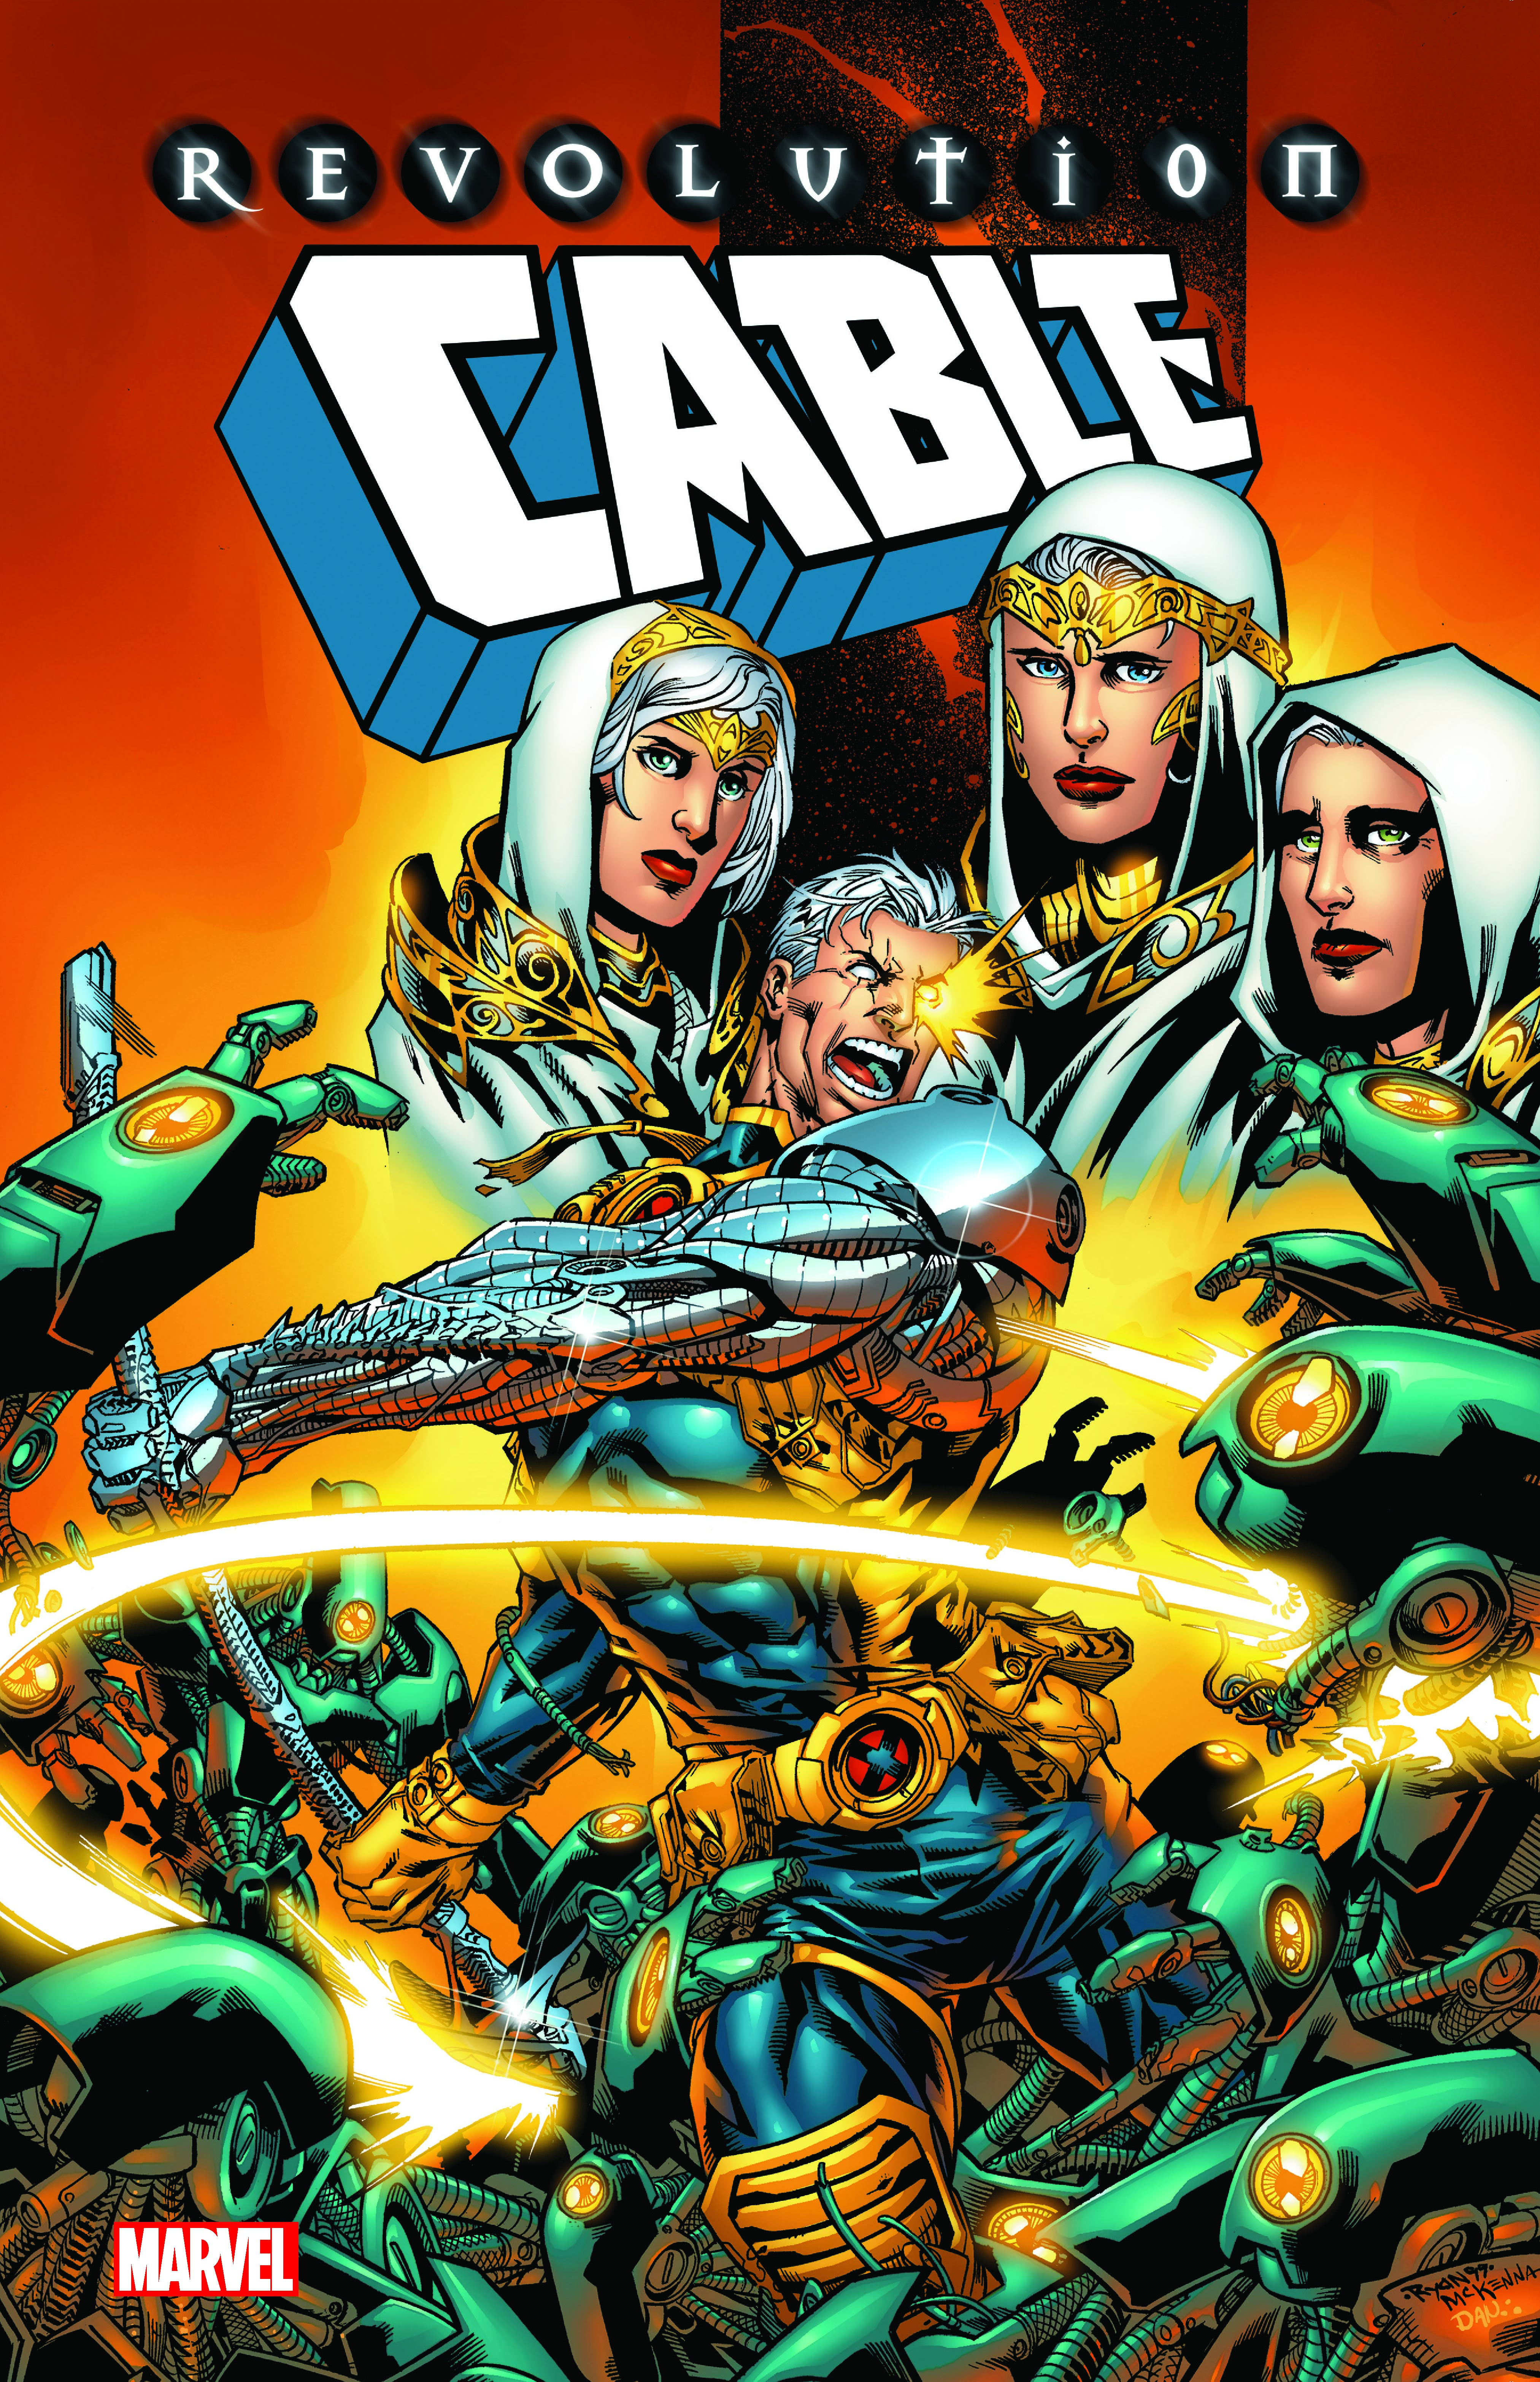 Cable: Revolution (Trade Paperback)